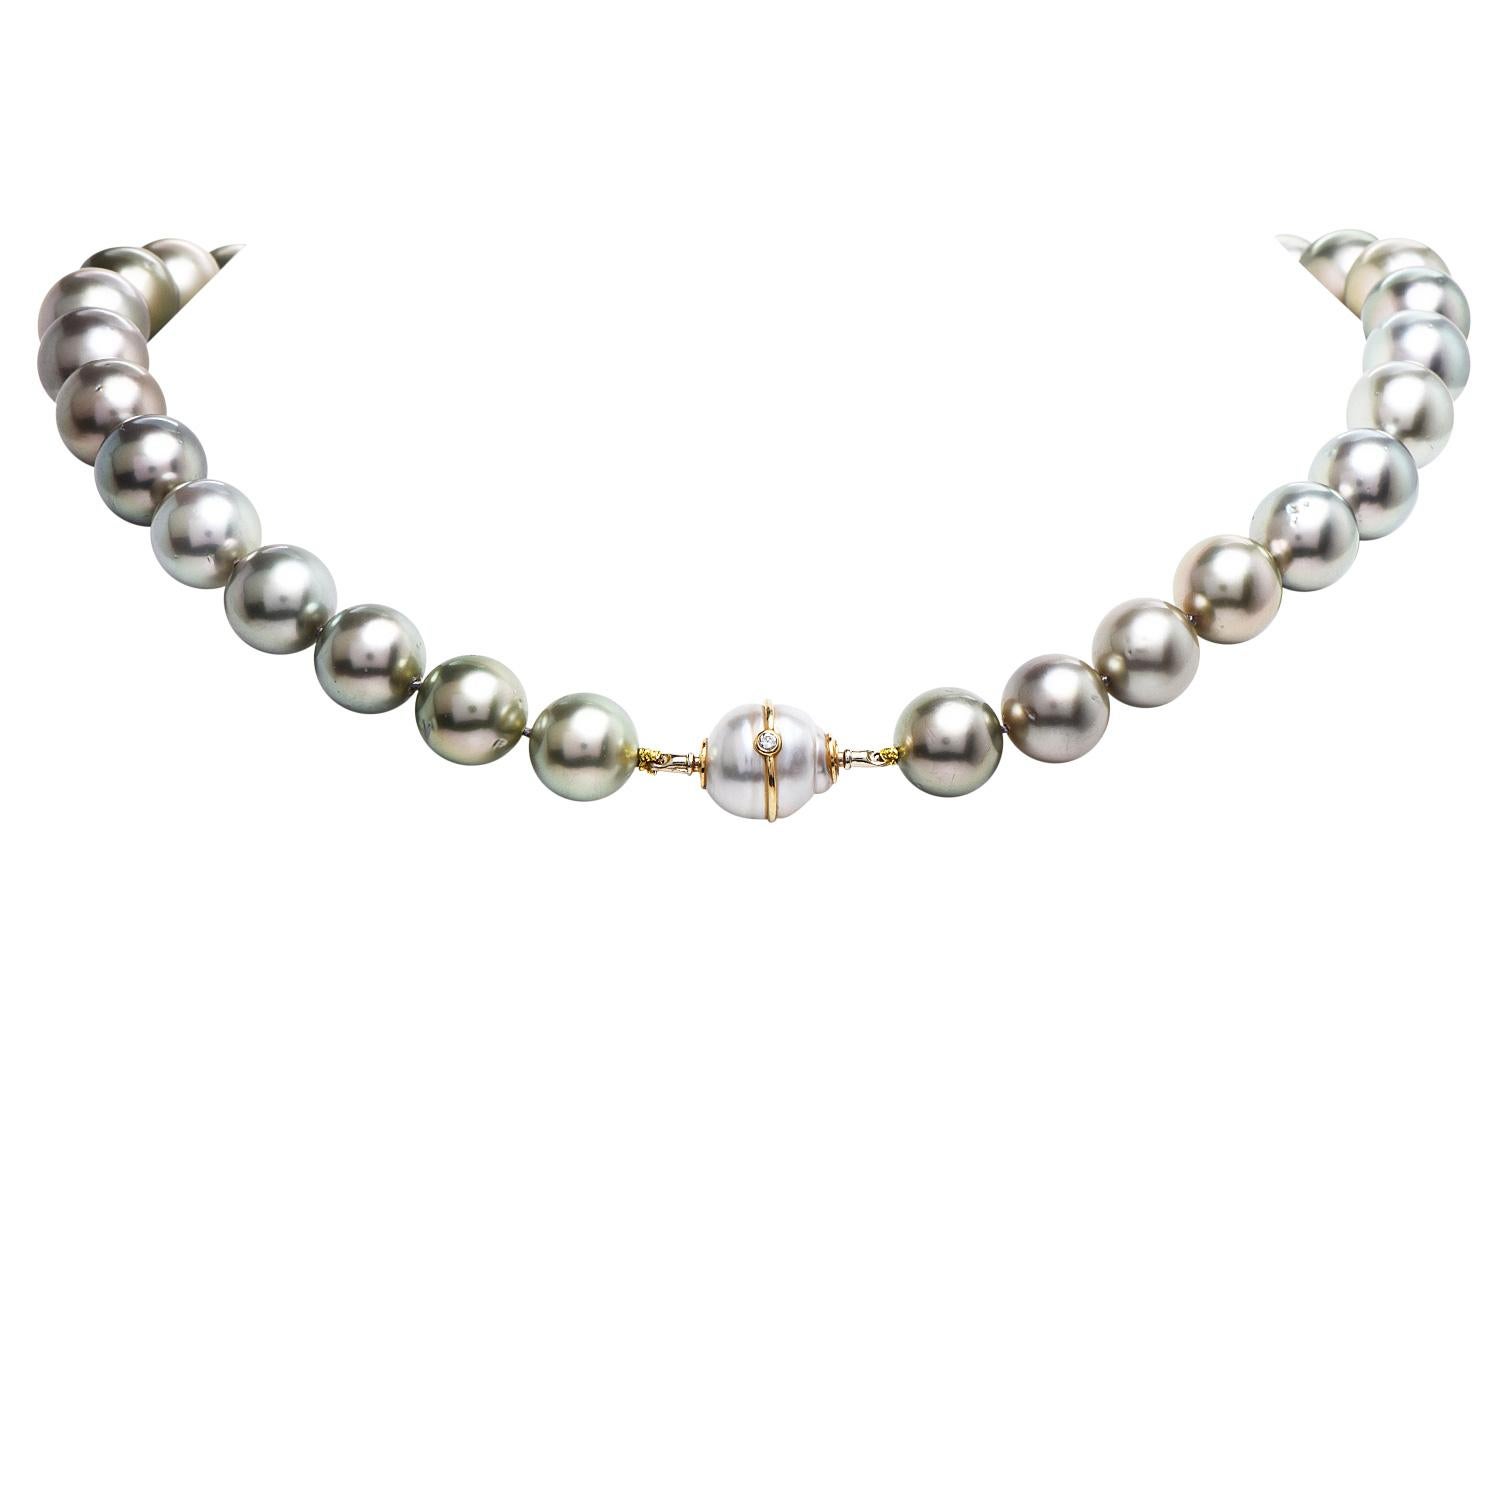 This Tahitian South Sea Pearl Diamond 18k  pearl and Gold displays 33 of lustrous graduated South Sea Pearls with Peacock gray tone. They measure 14mm to 10.5mm in diameter, perfectly matching in color and size.

The necklace weighs 84.5 grams and